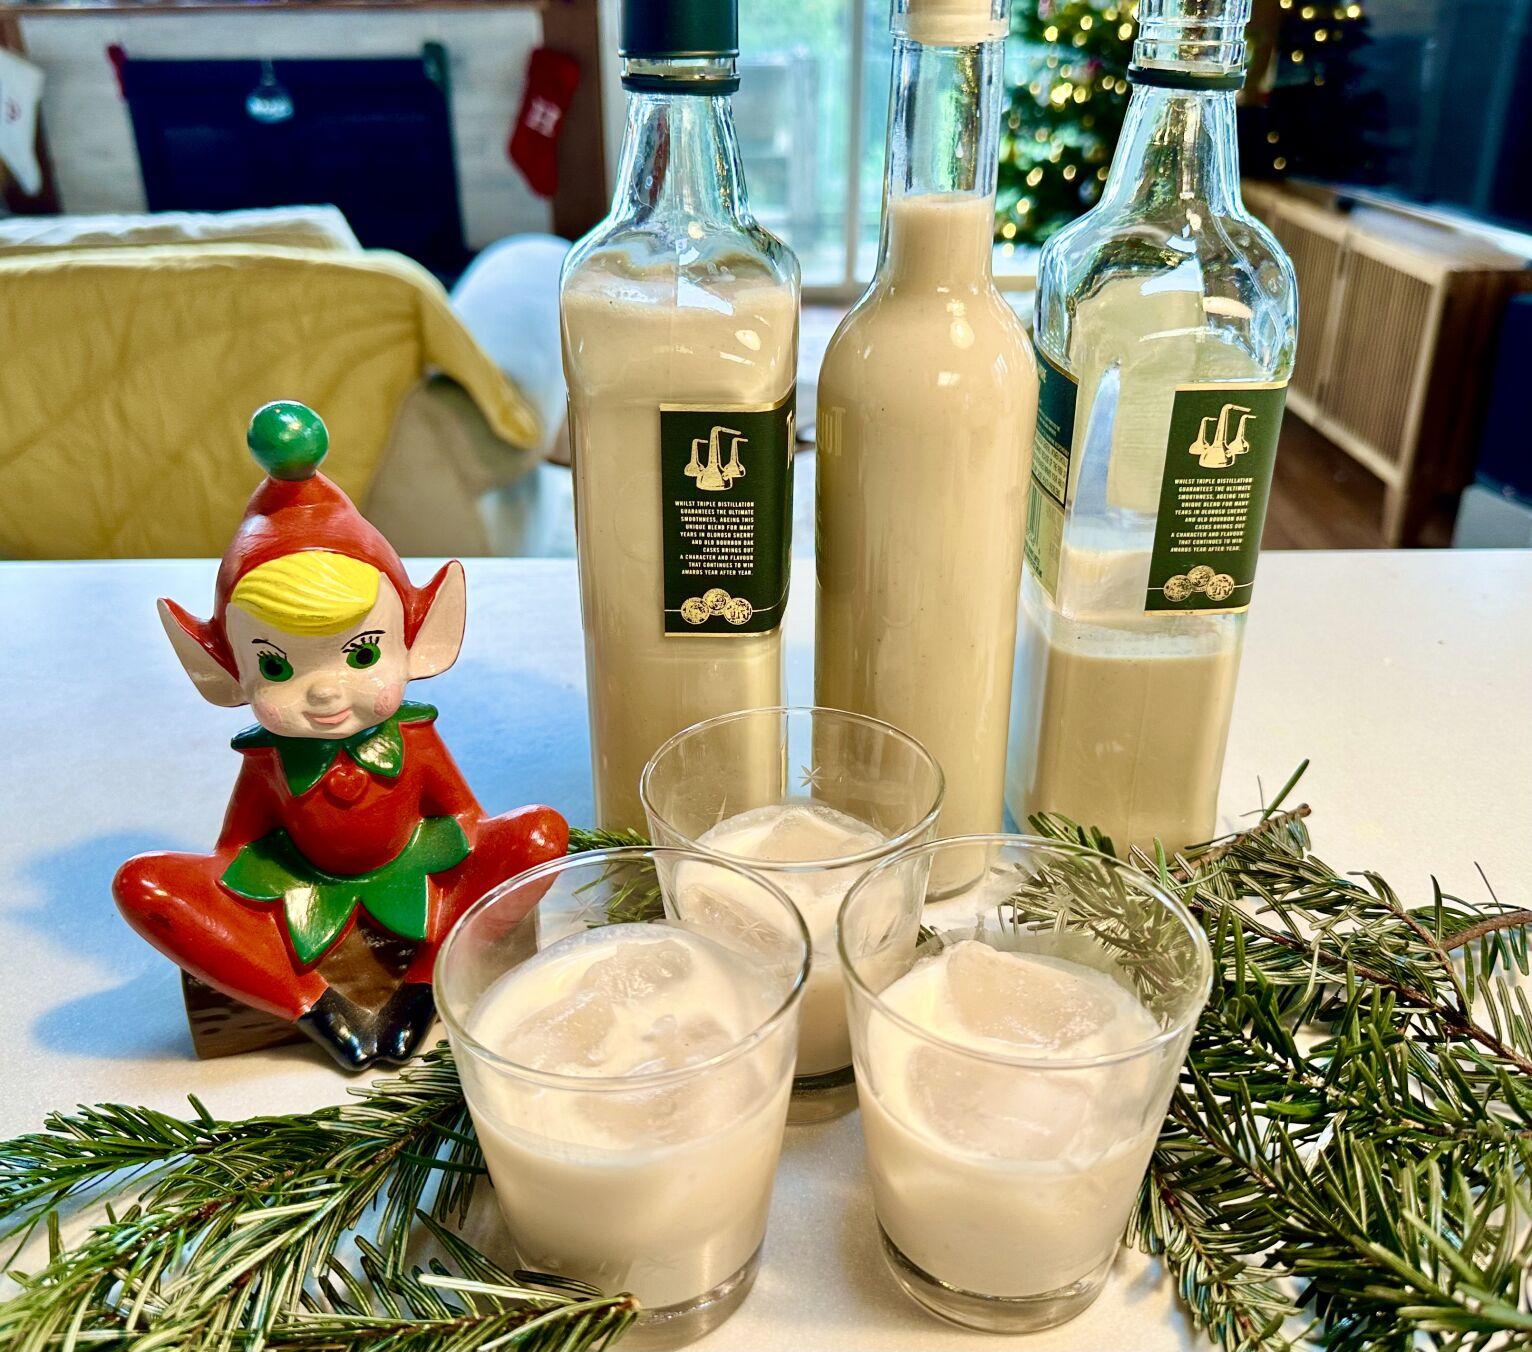 Leprechaun figurine sitting next to three bottles of tan-colored homemade Irish Cream, and three cocktail glasses with ice and Irish Cream. Sitting on white table with pine branches for decoration. Christmas decorations in background.